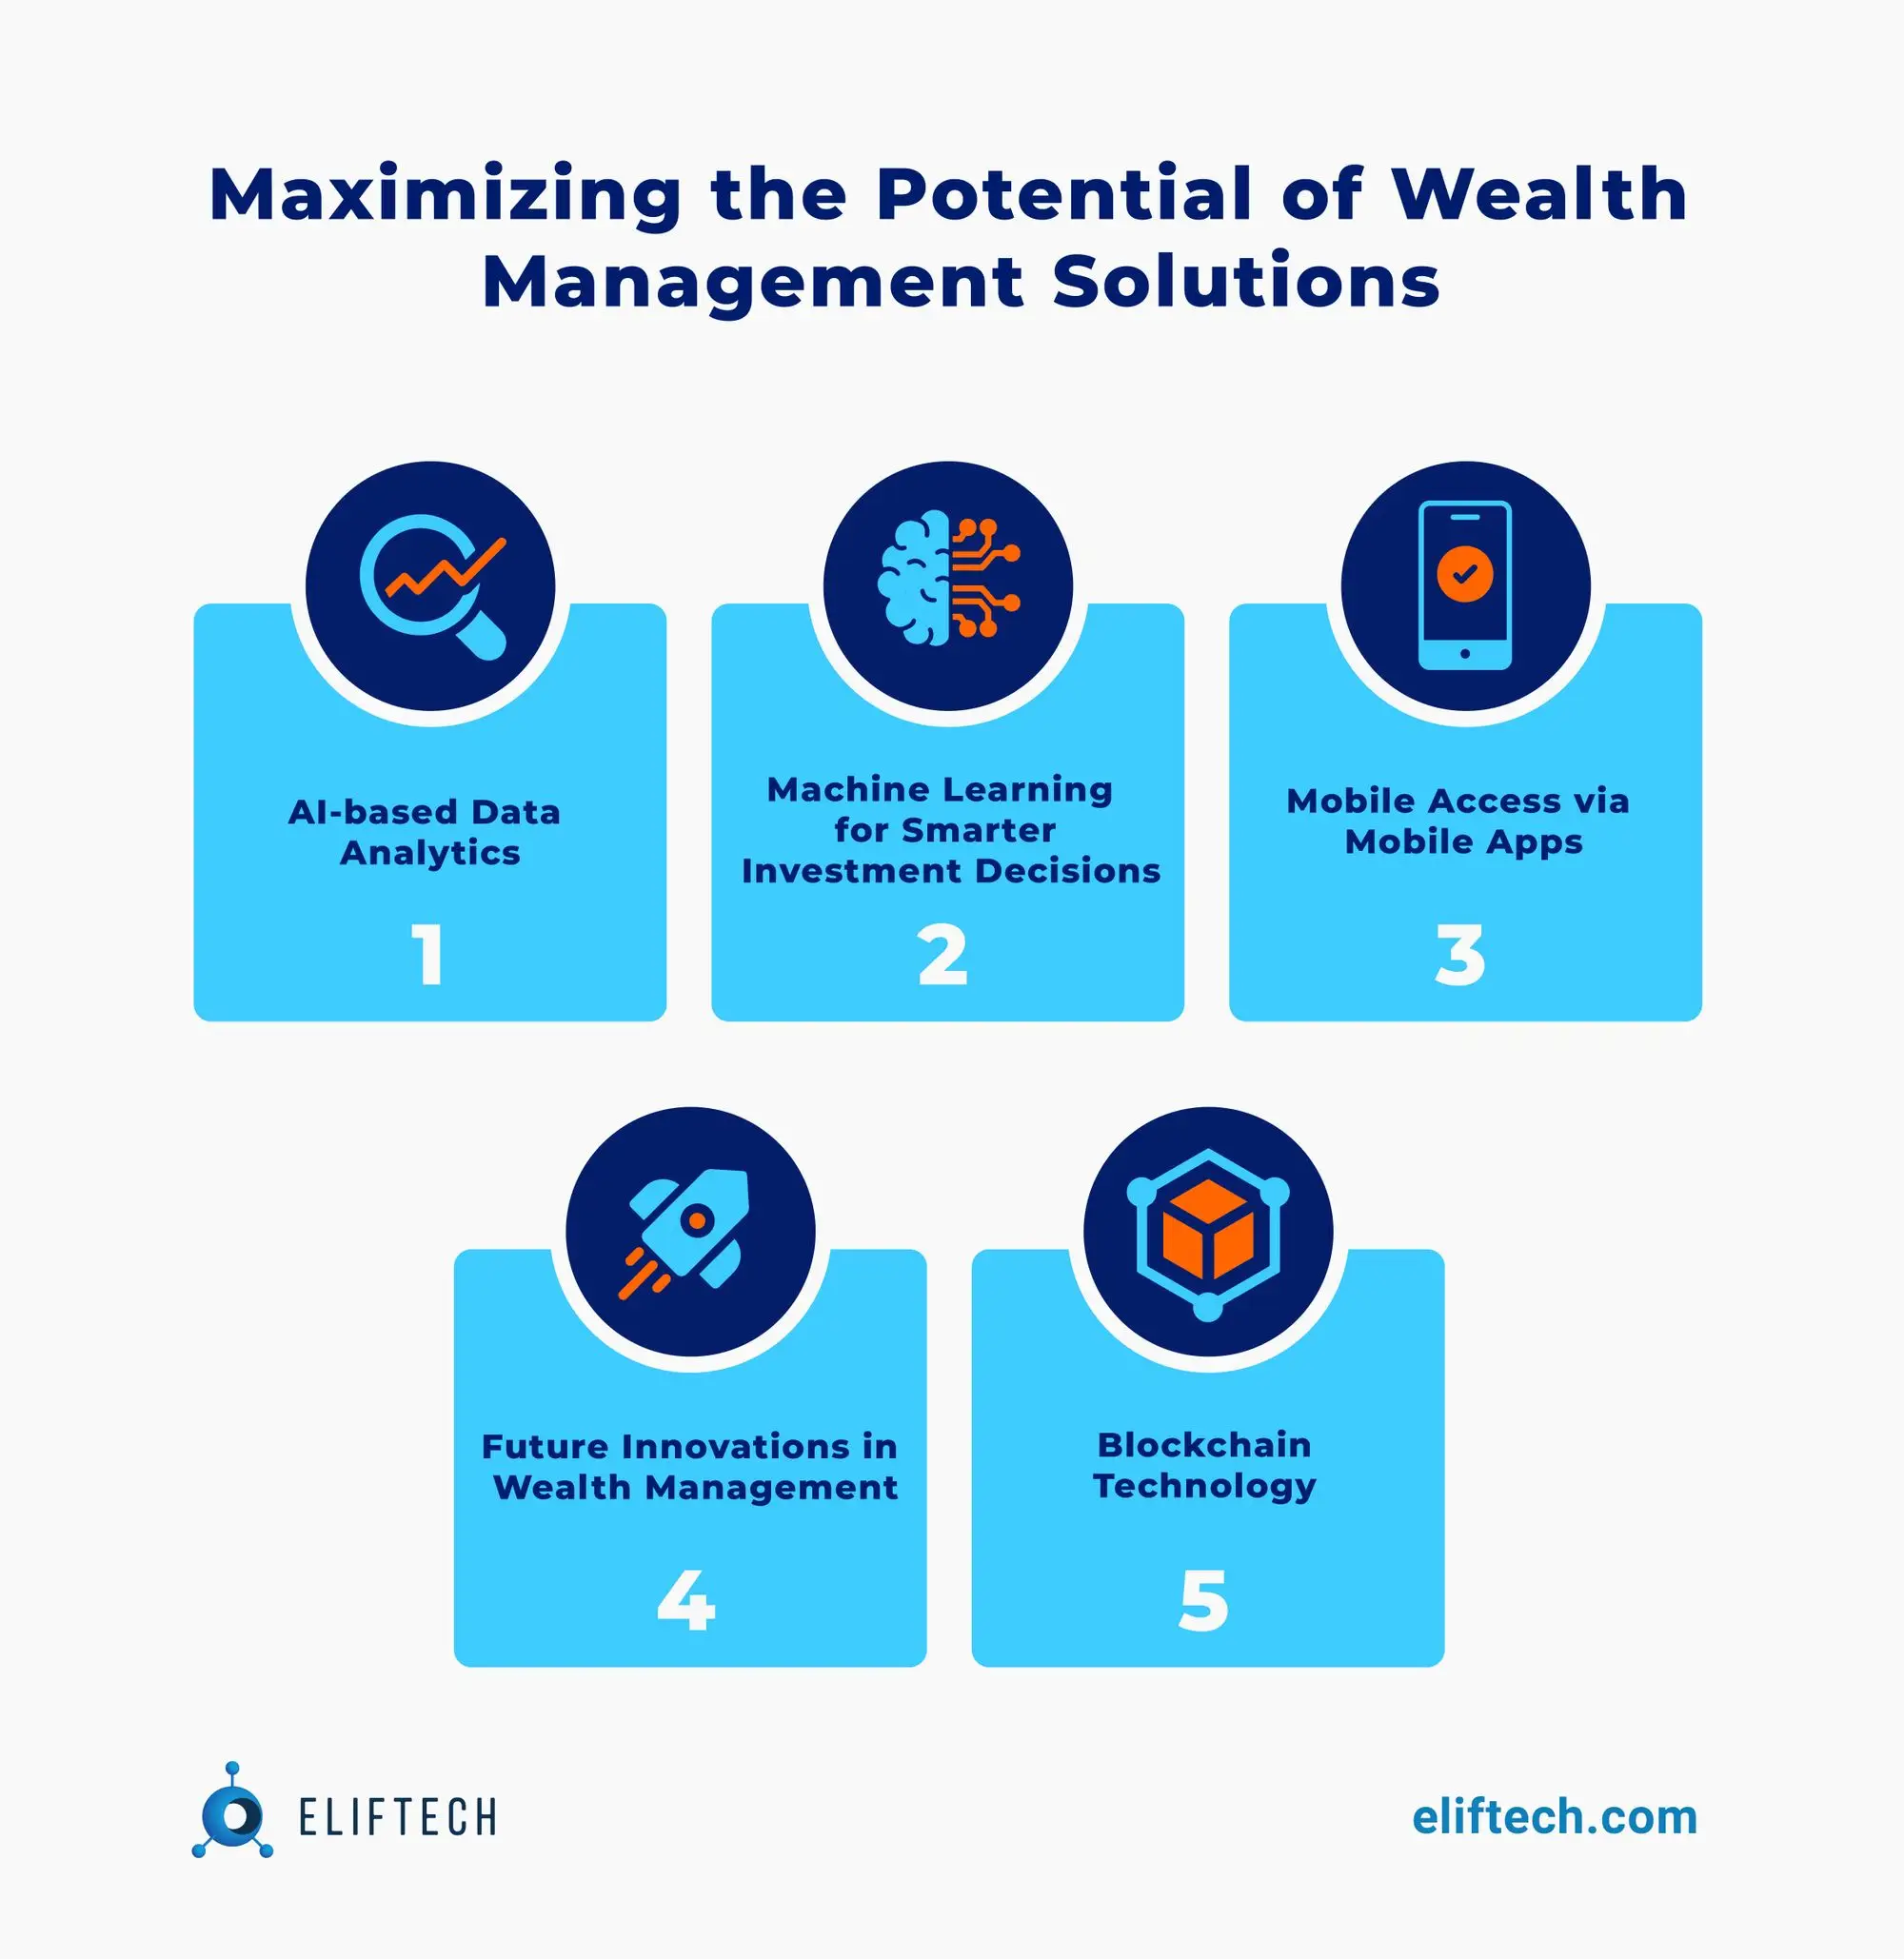 Maximizing the Potential of Wealth Management Solutions